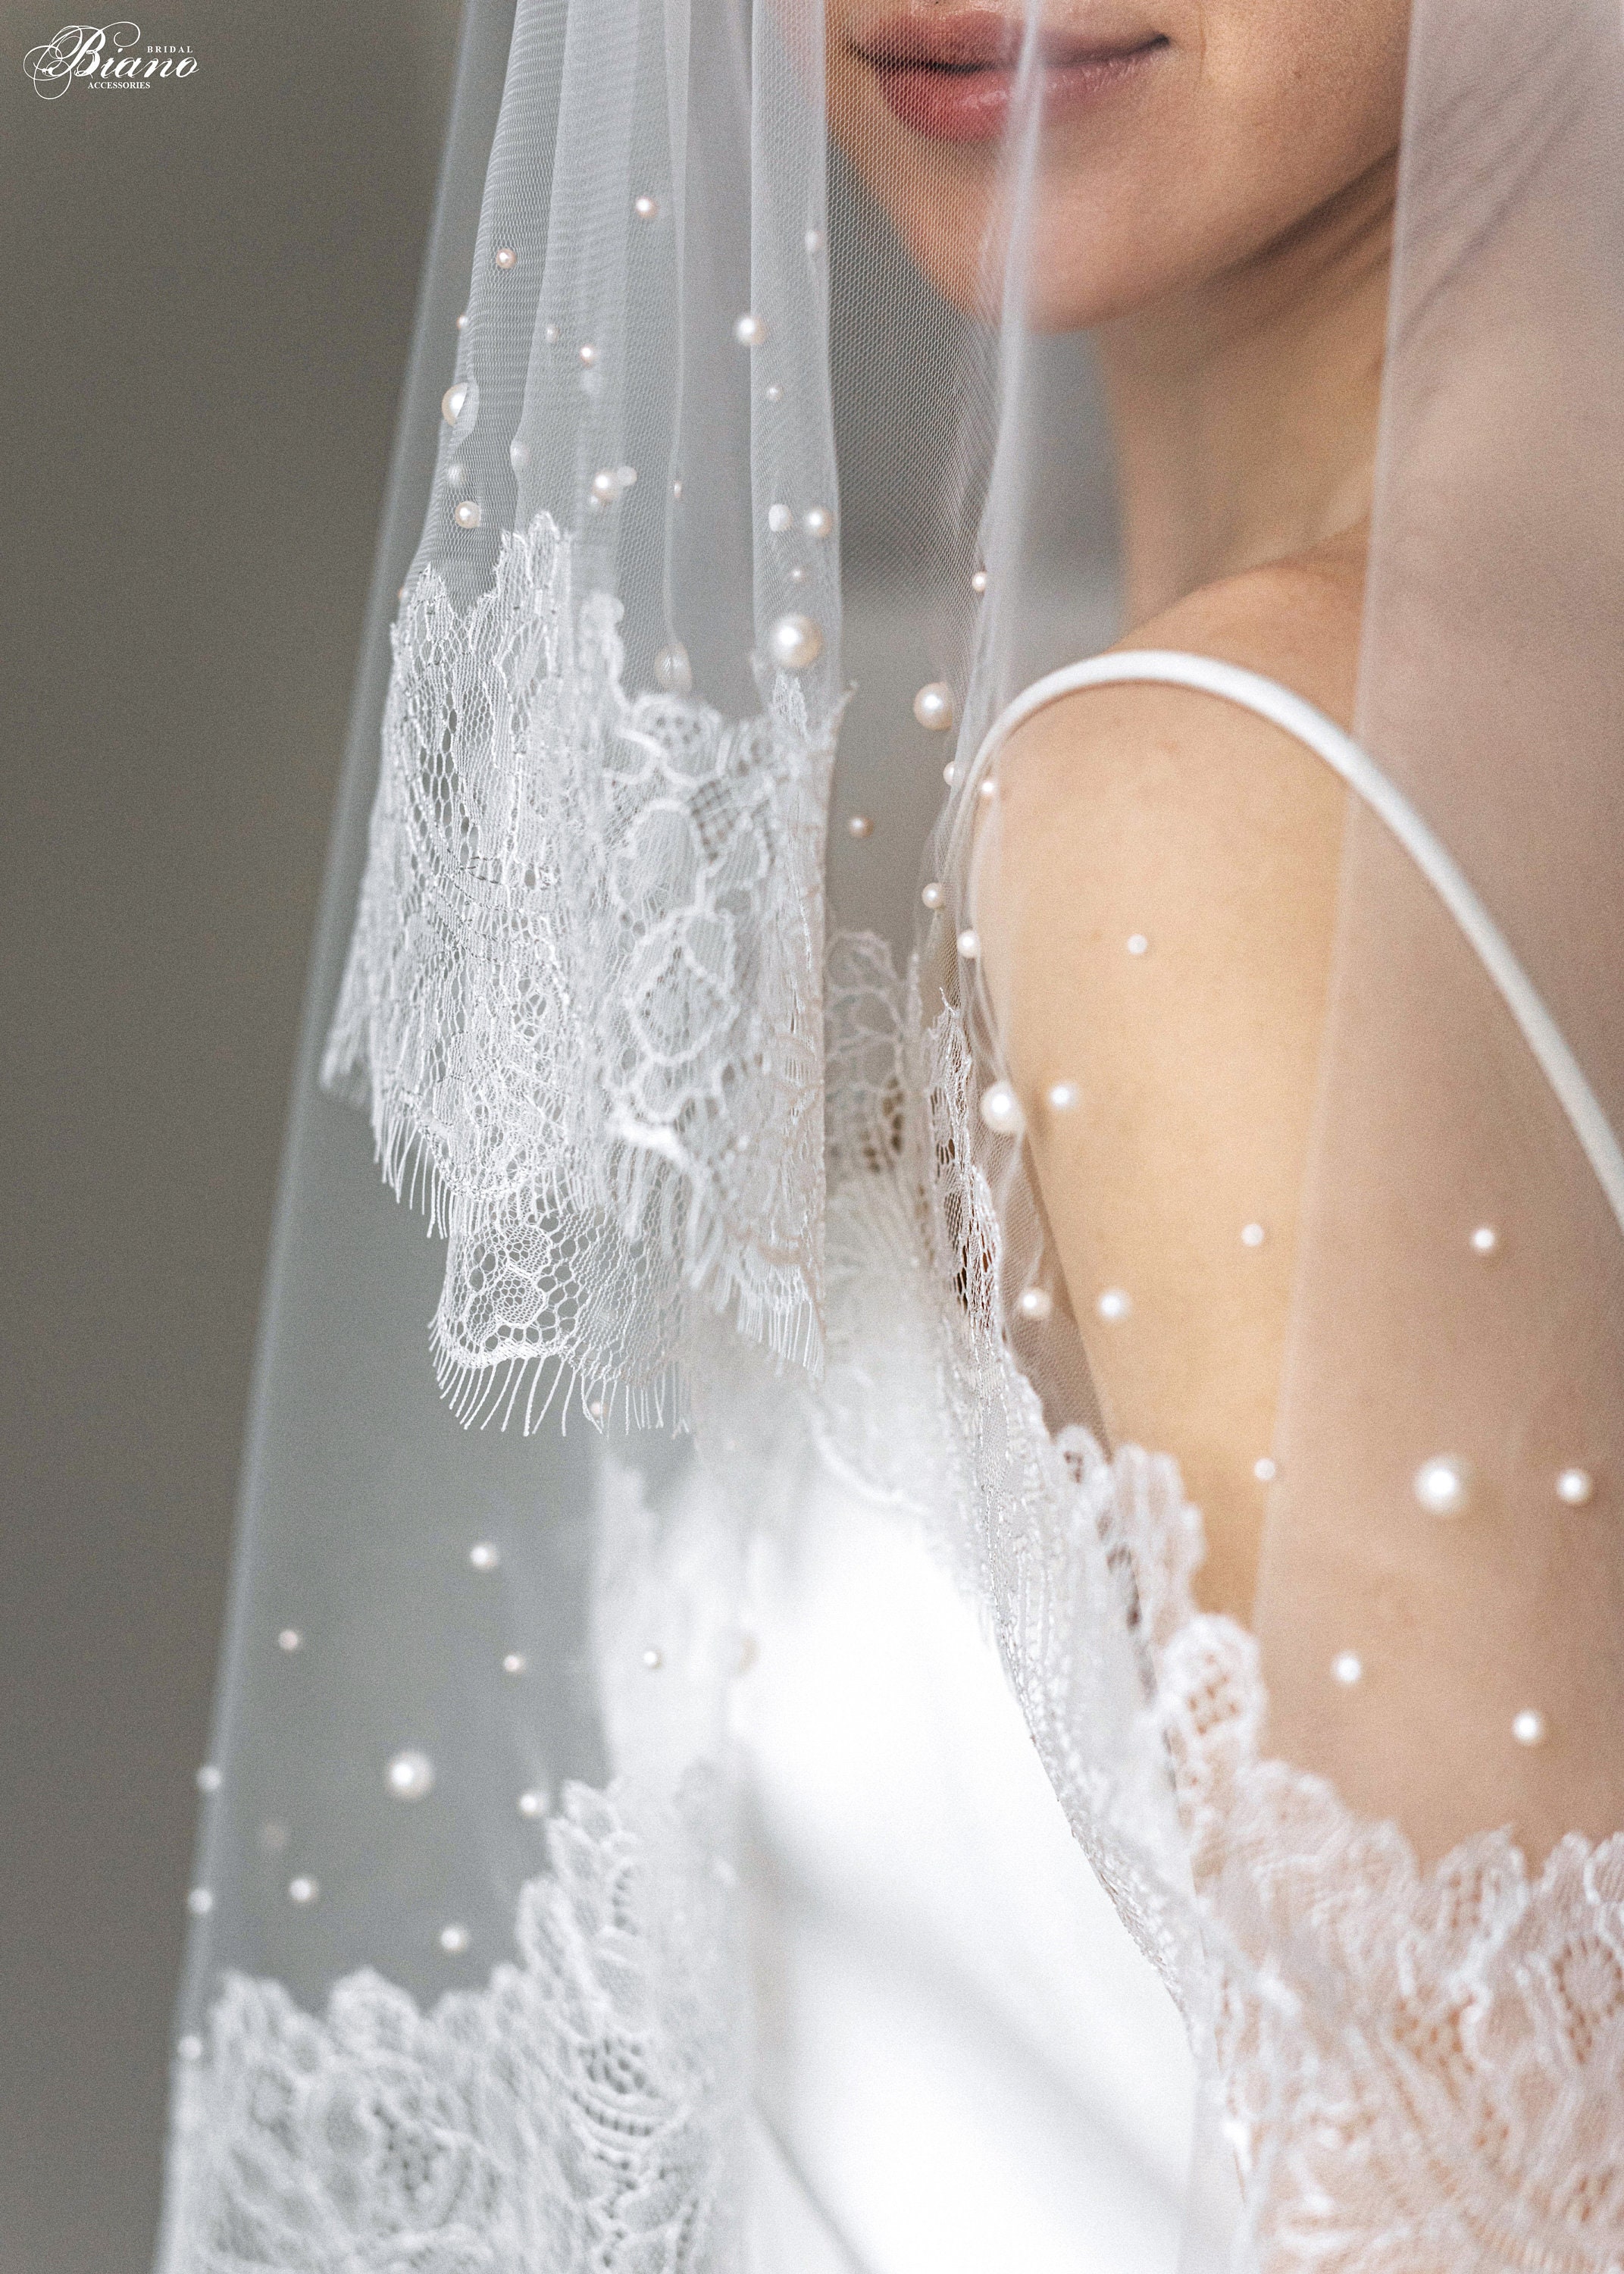 114 Abbey Length Ivory Bridal Veil with Scattered Pearls — Lanoviafactory